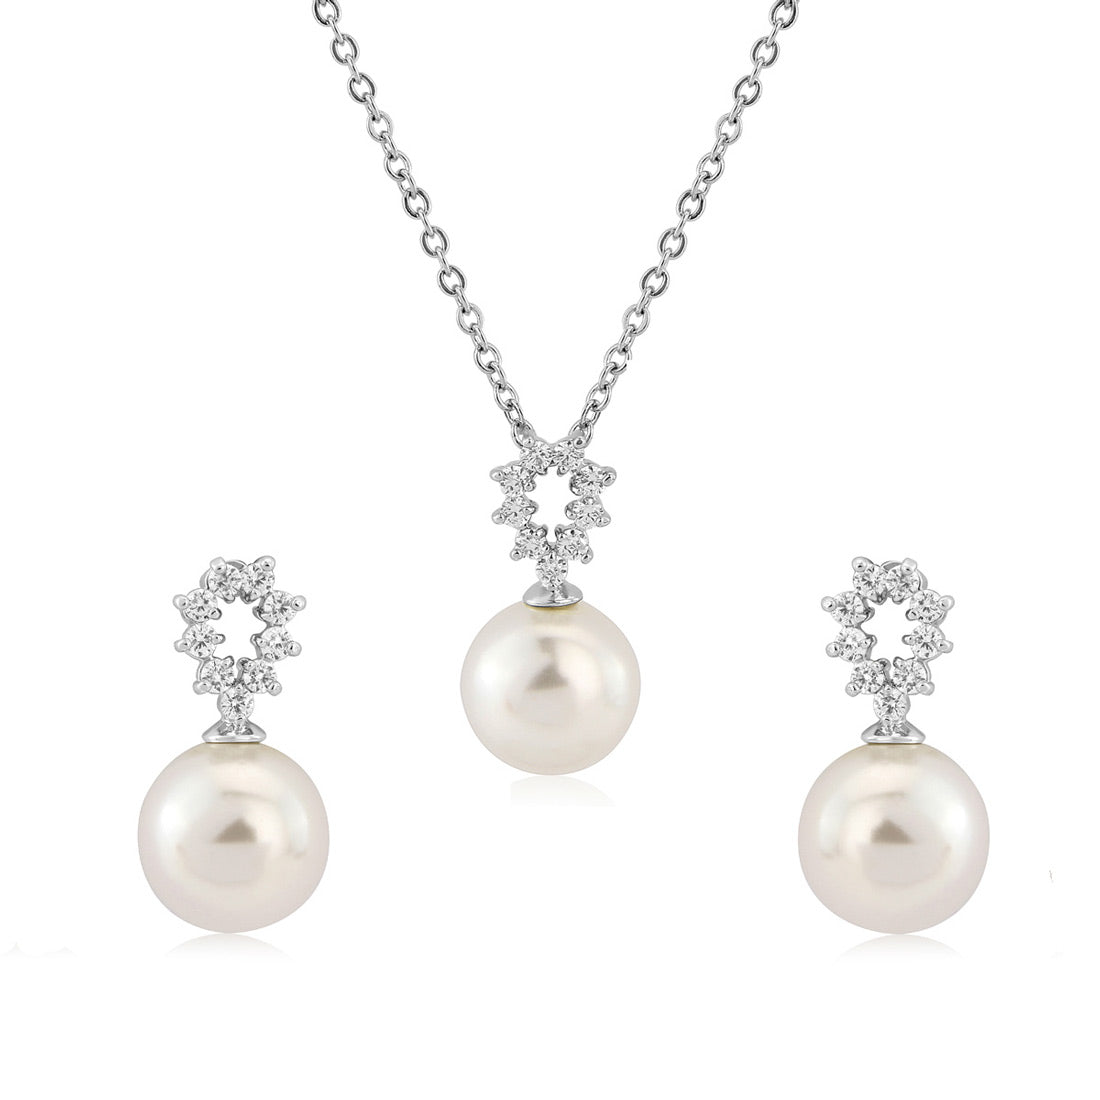 Timeless Pearl Jewellery Set with Small Drop Earrings and Pendant